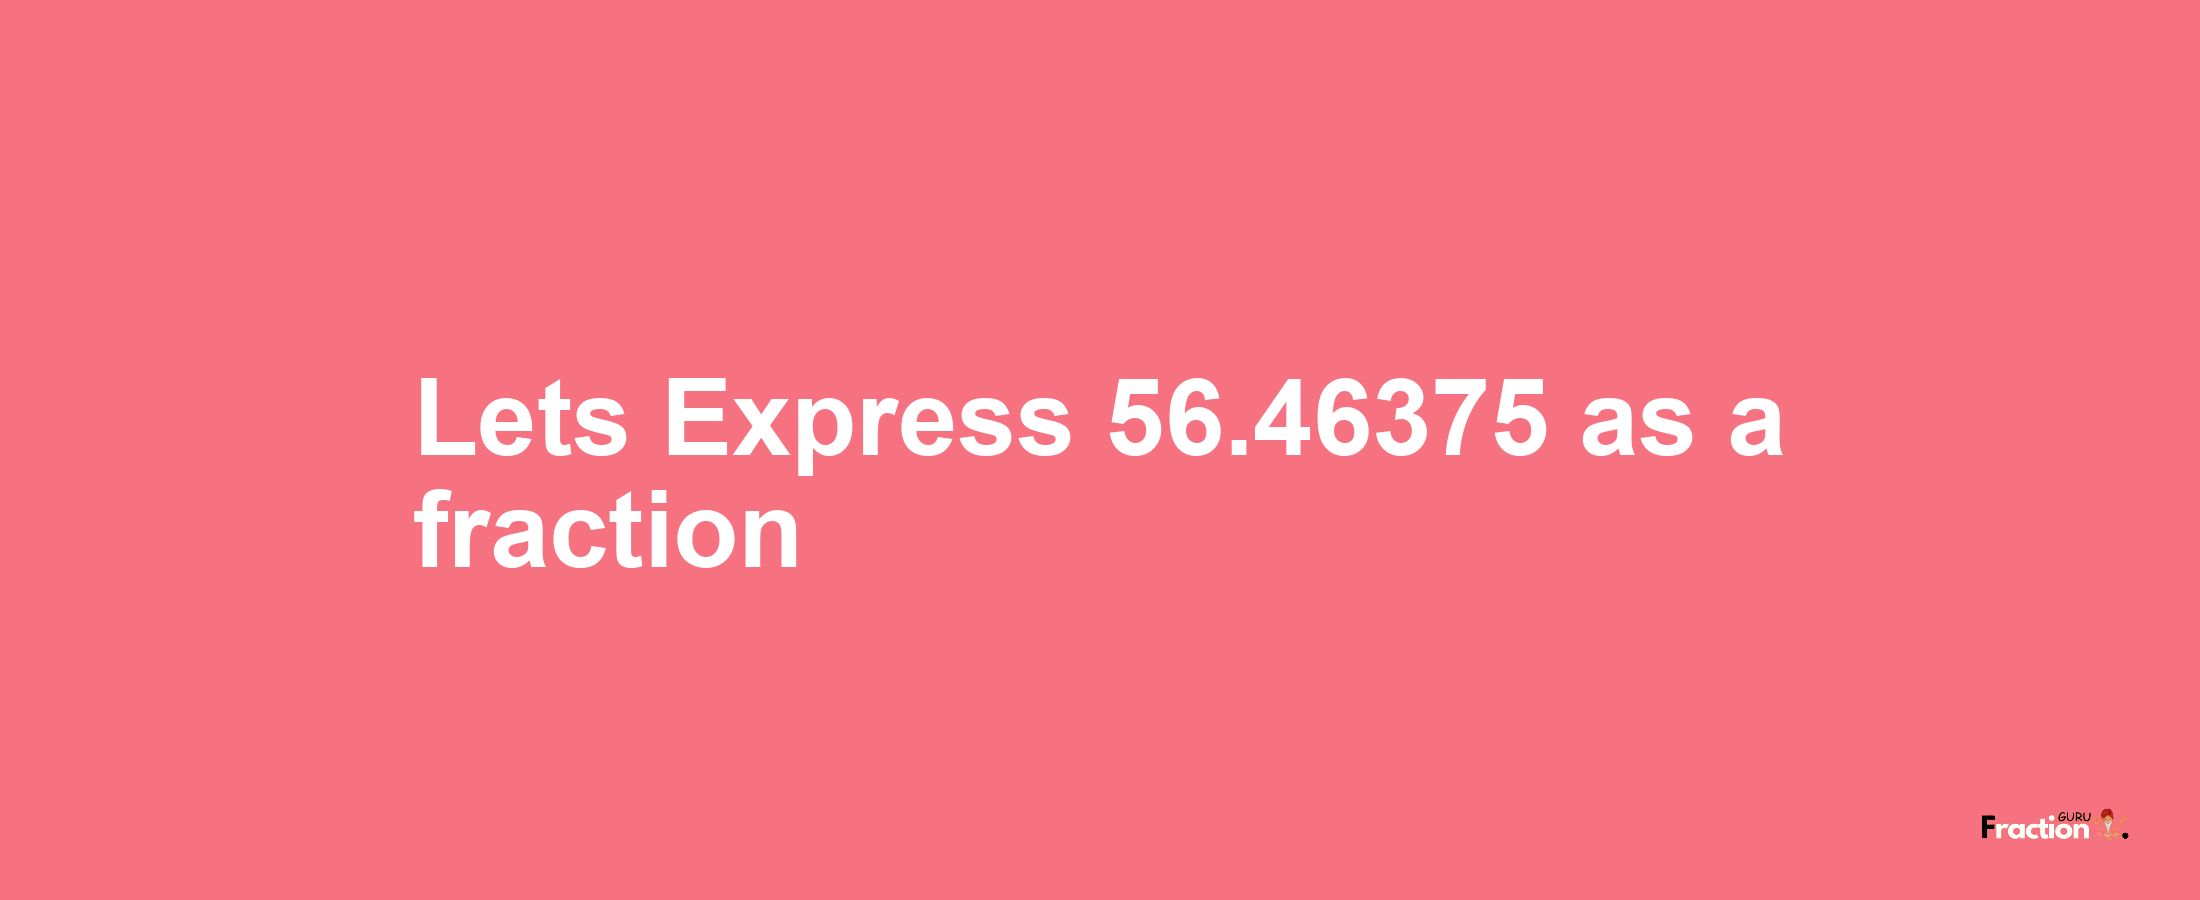 Lets Express 56.46375 as afraction